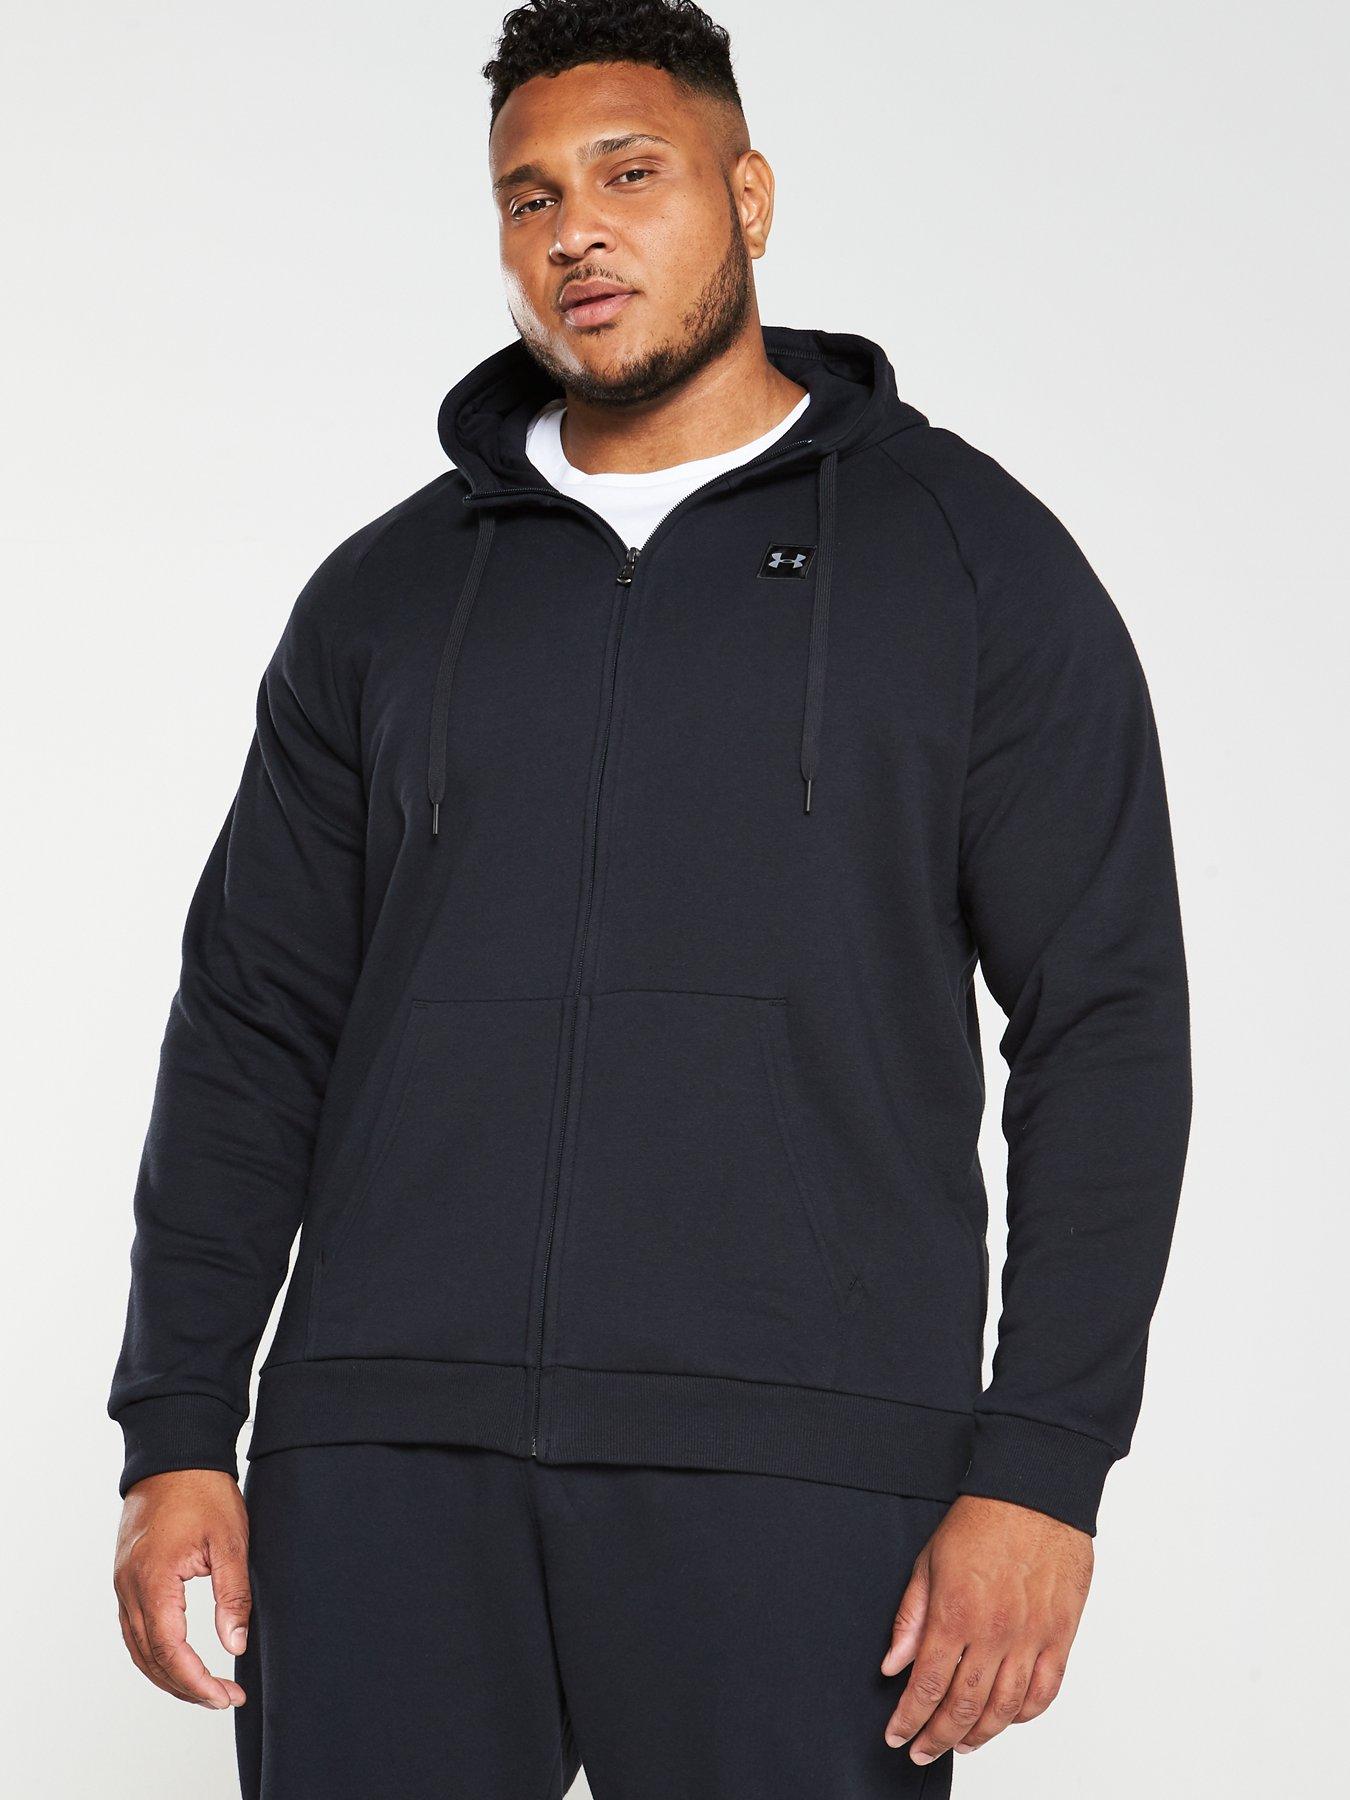 The Ultimate Guide to Finding the Best 4XL Hoodies for Big and Tall Men